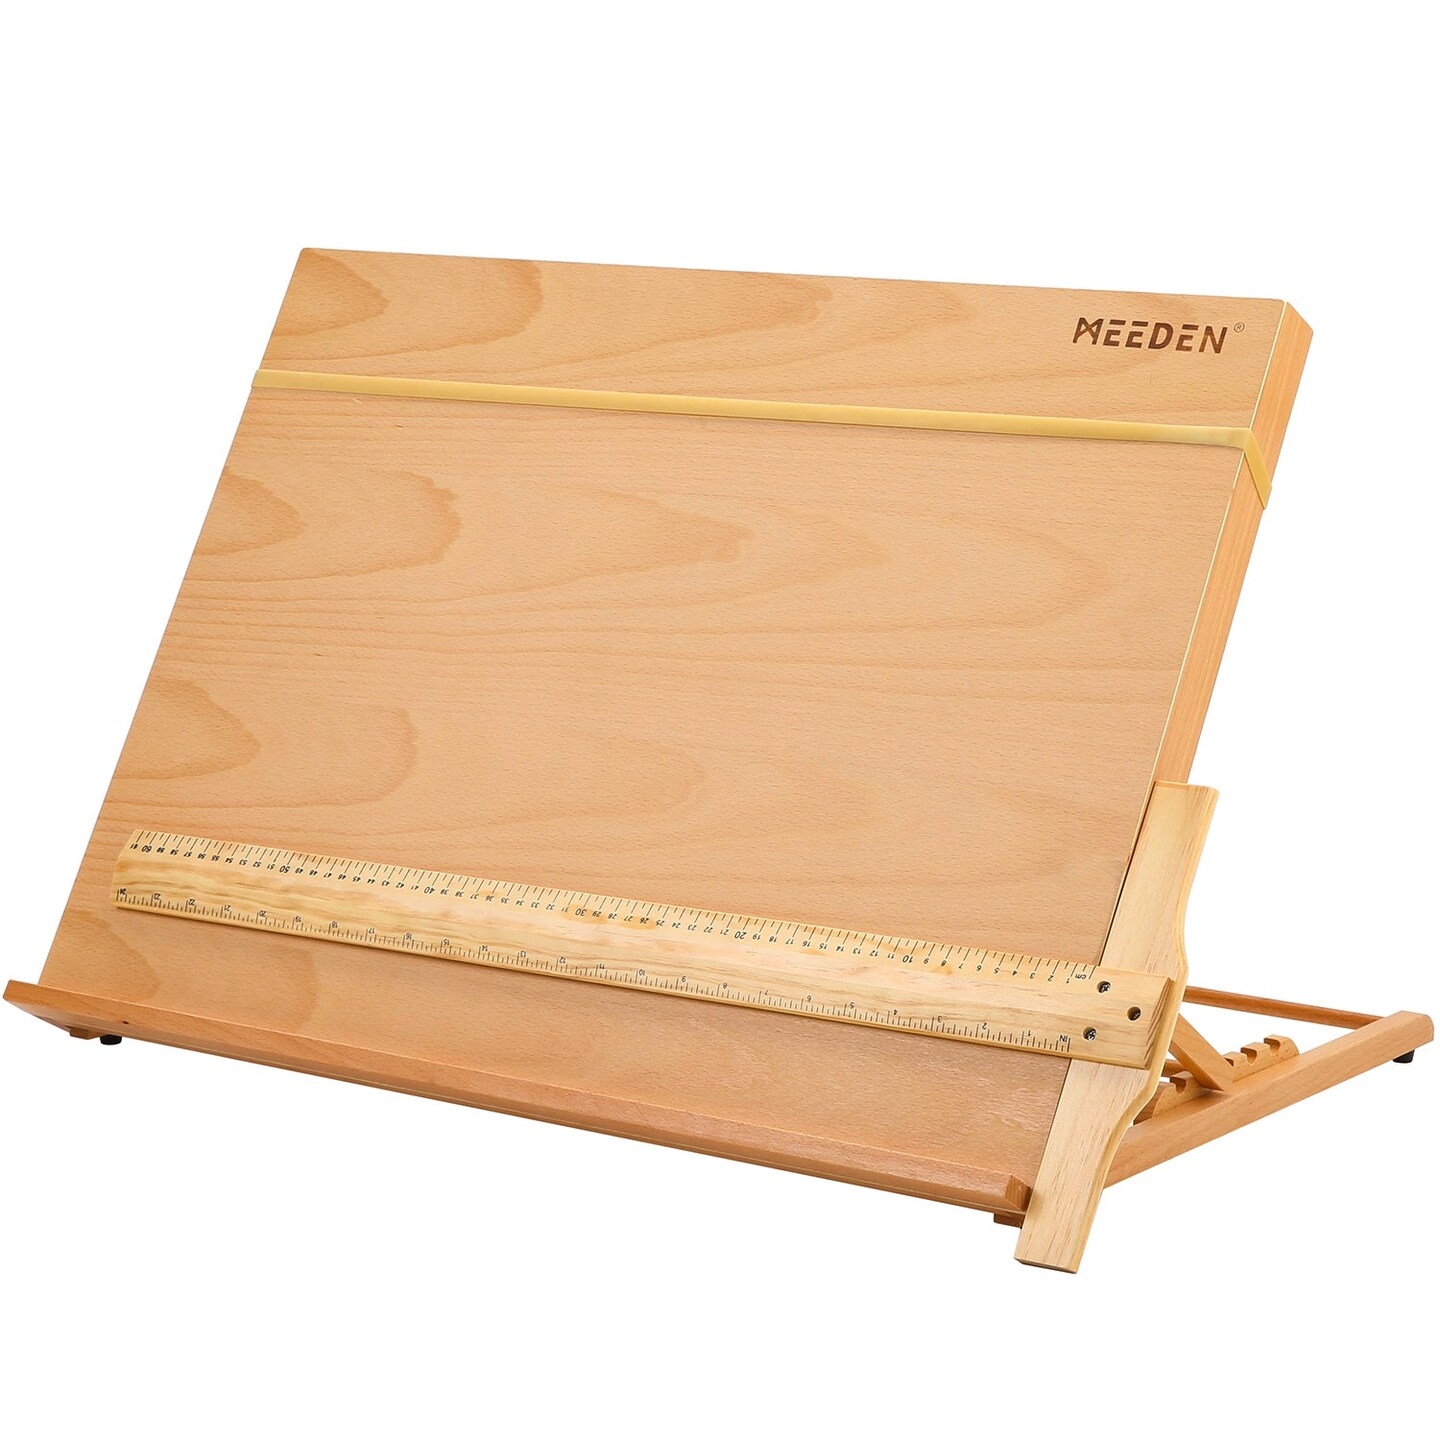 MEEDEN Large Studio Artist Drawing &#x26; Sketching Board, Adjustable Beechwood A2 Sketchboard for Students, Beginners &#x26; Artist- Wood Desktop Easel Board with T-Square, 25-5/8&#x22; X 19&#x22;